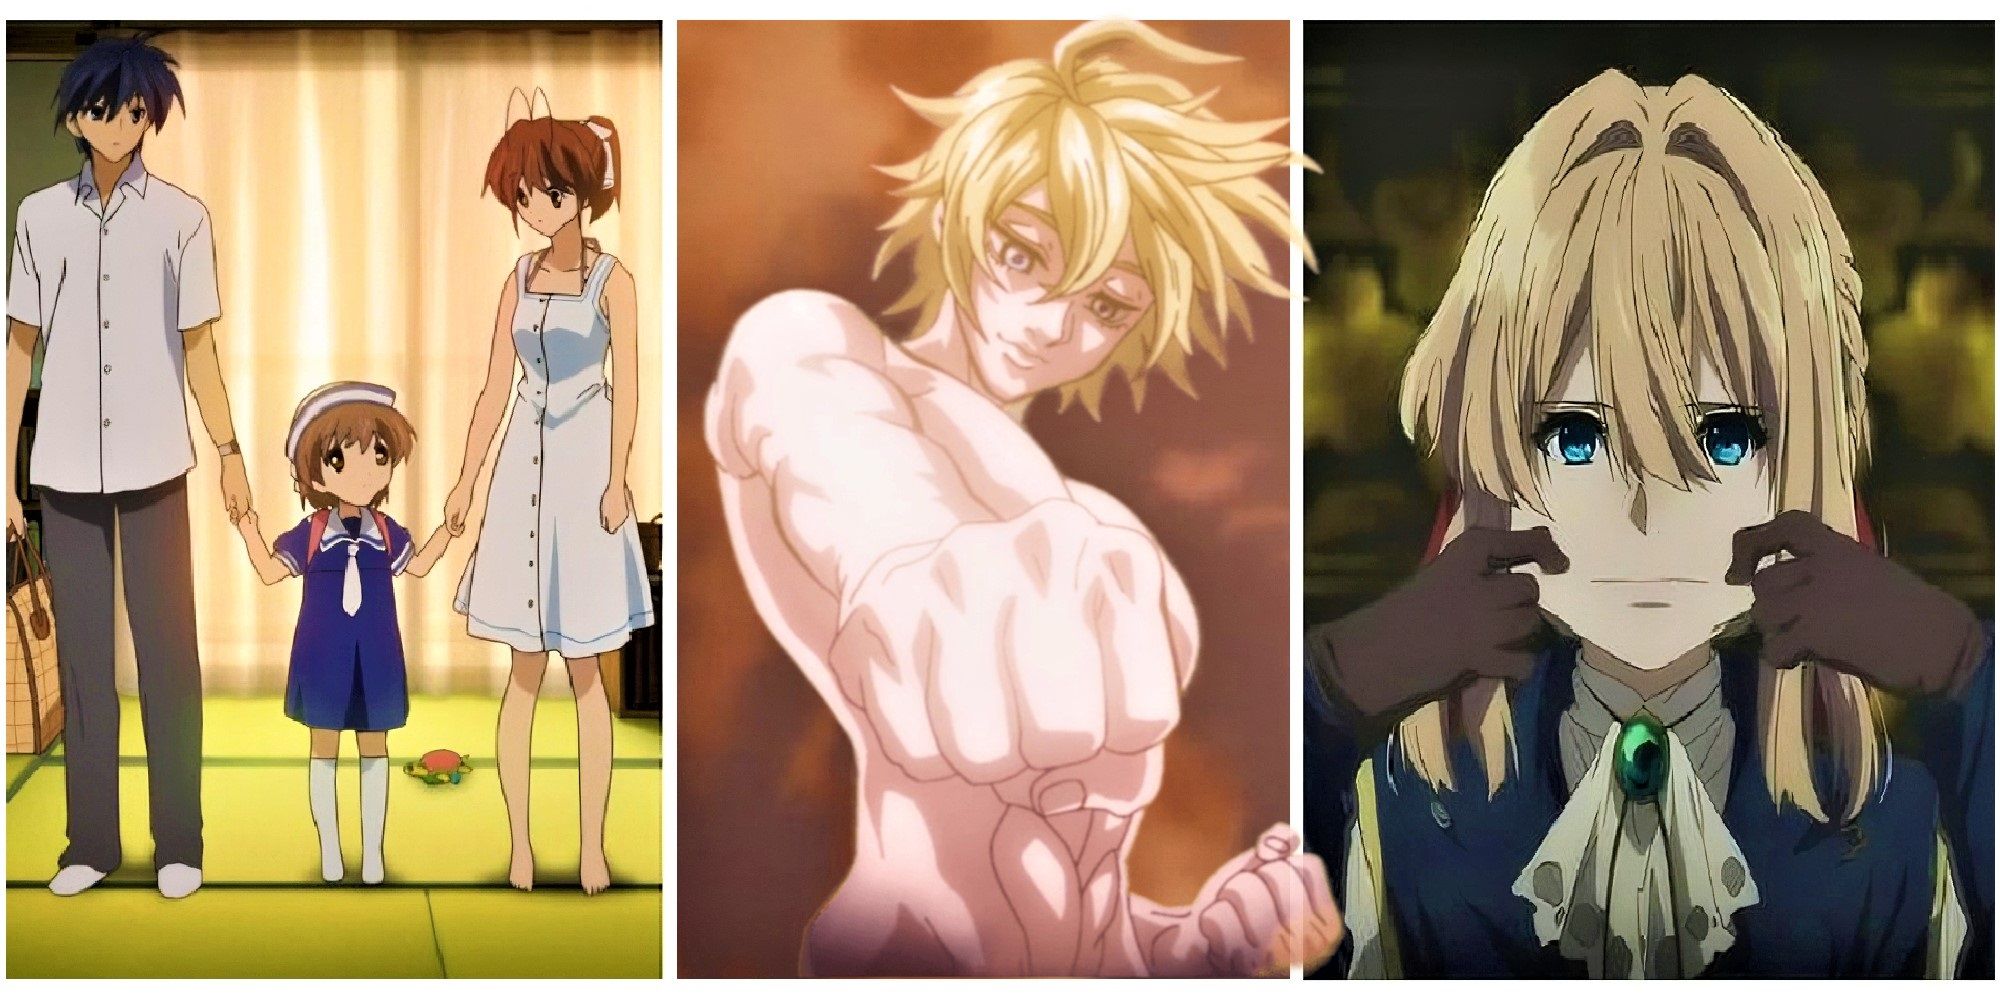 10 Best Anime Shows With Meaningful Lessons & Inspiration